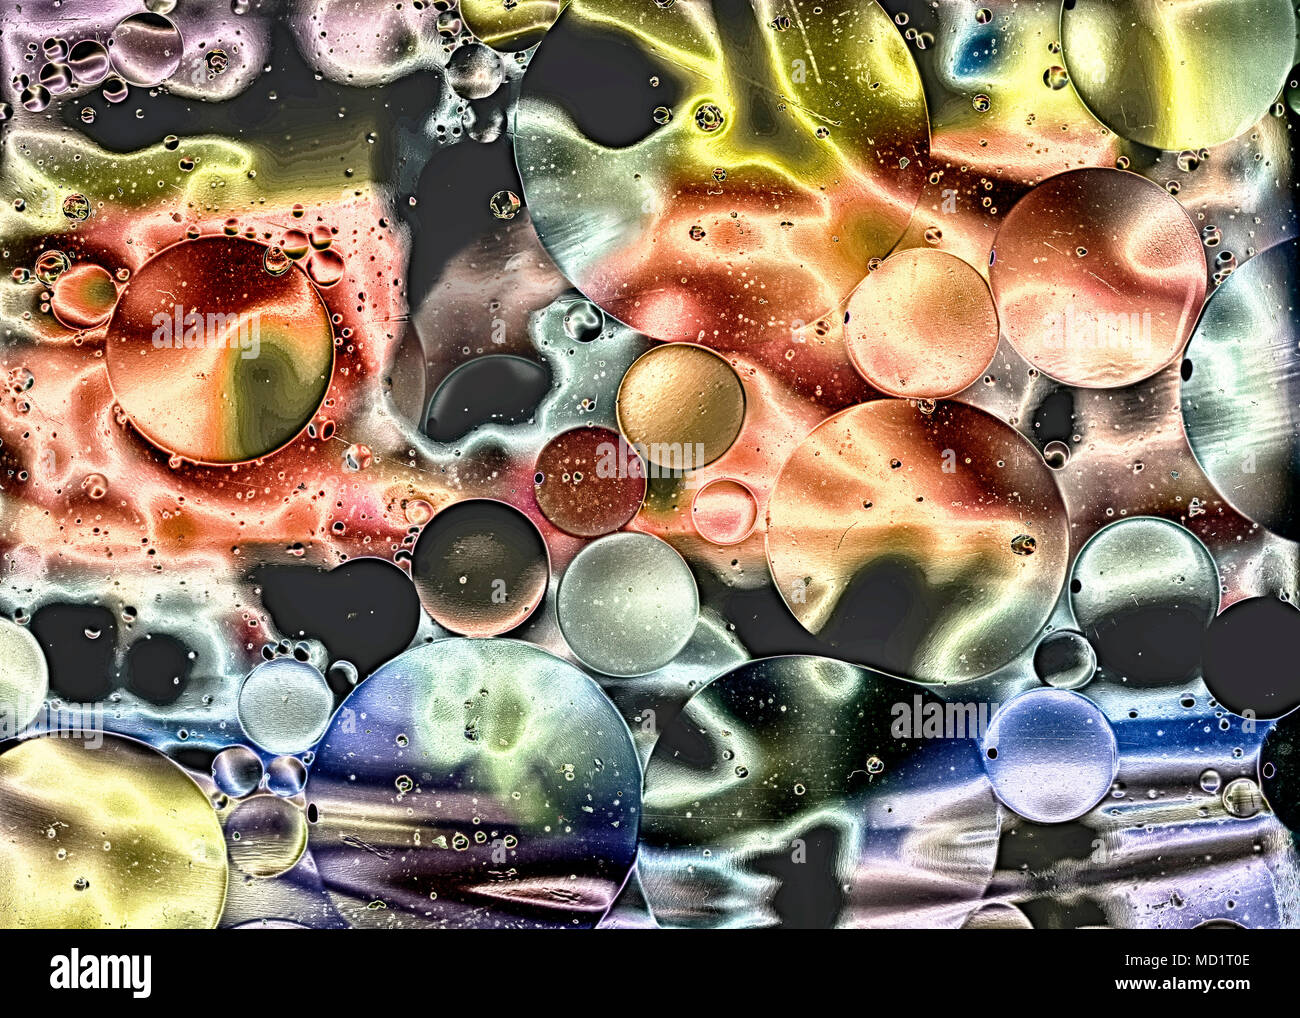 Abstract photo of an oil slick Stock Photo